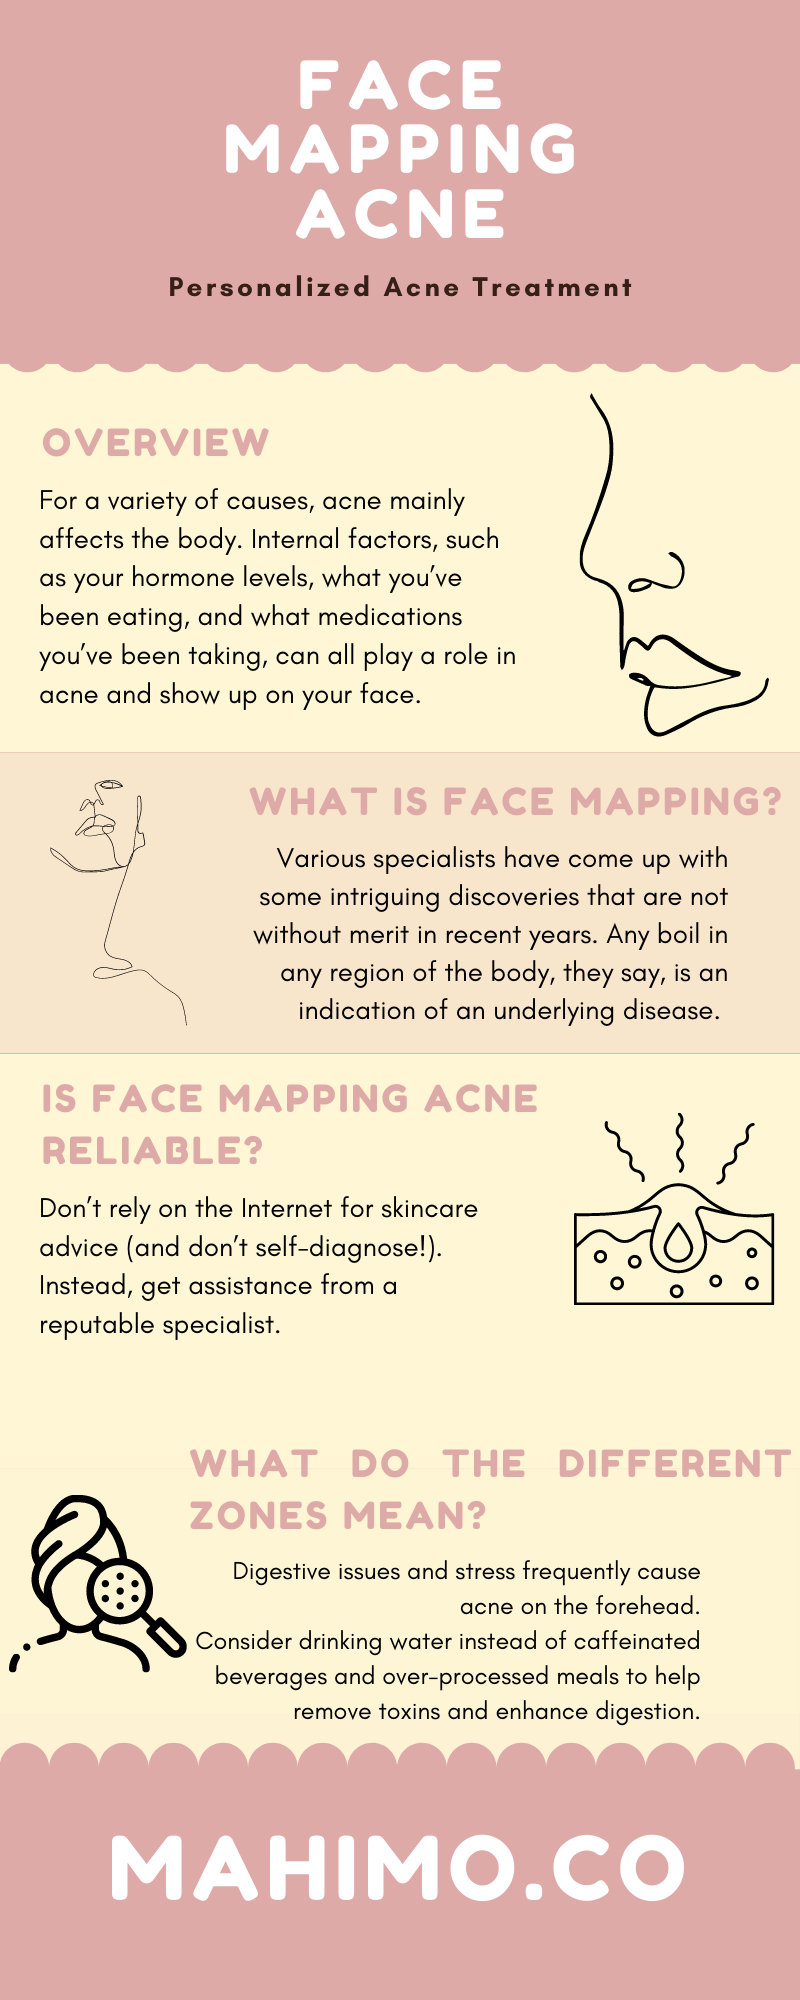 Face Mapping Acne